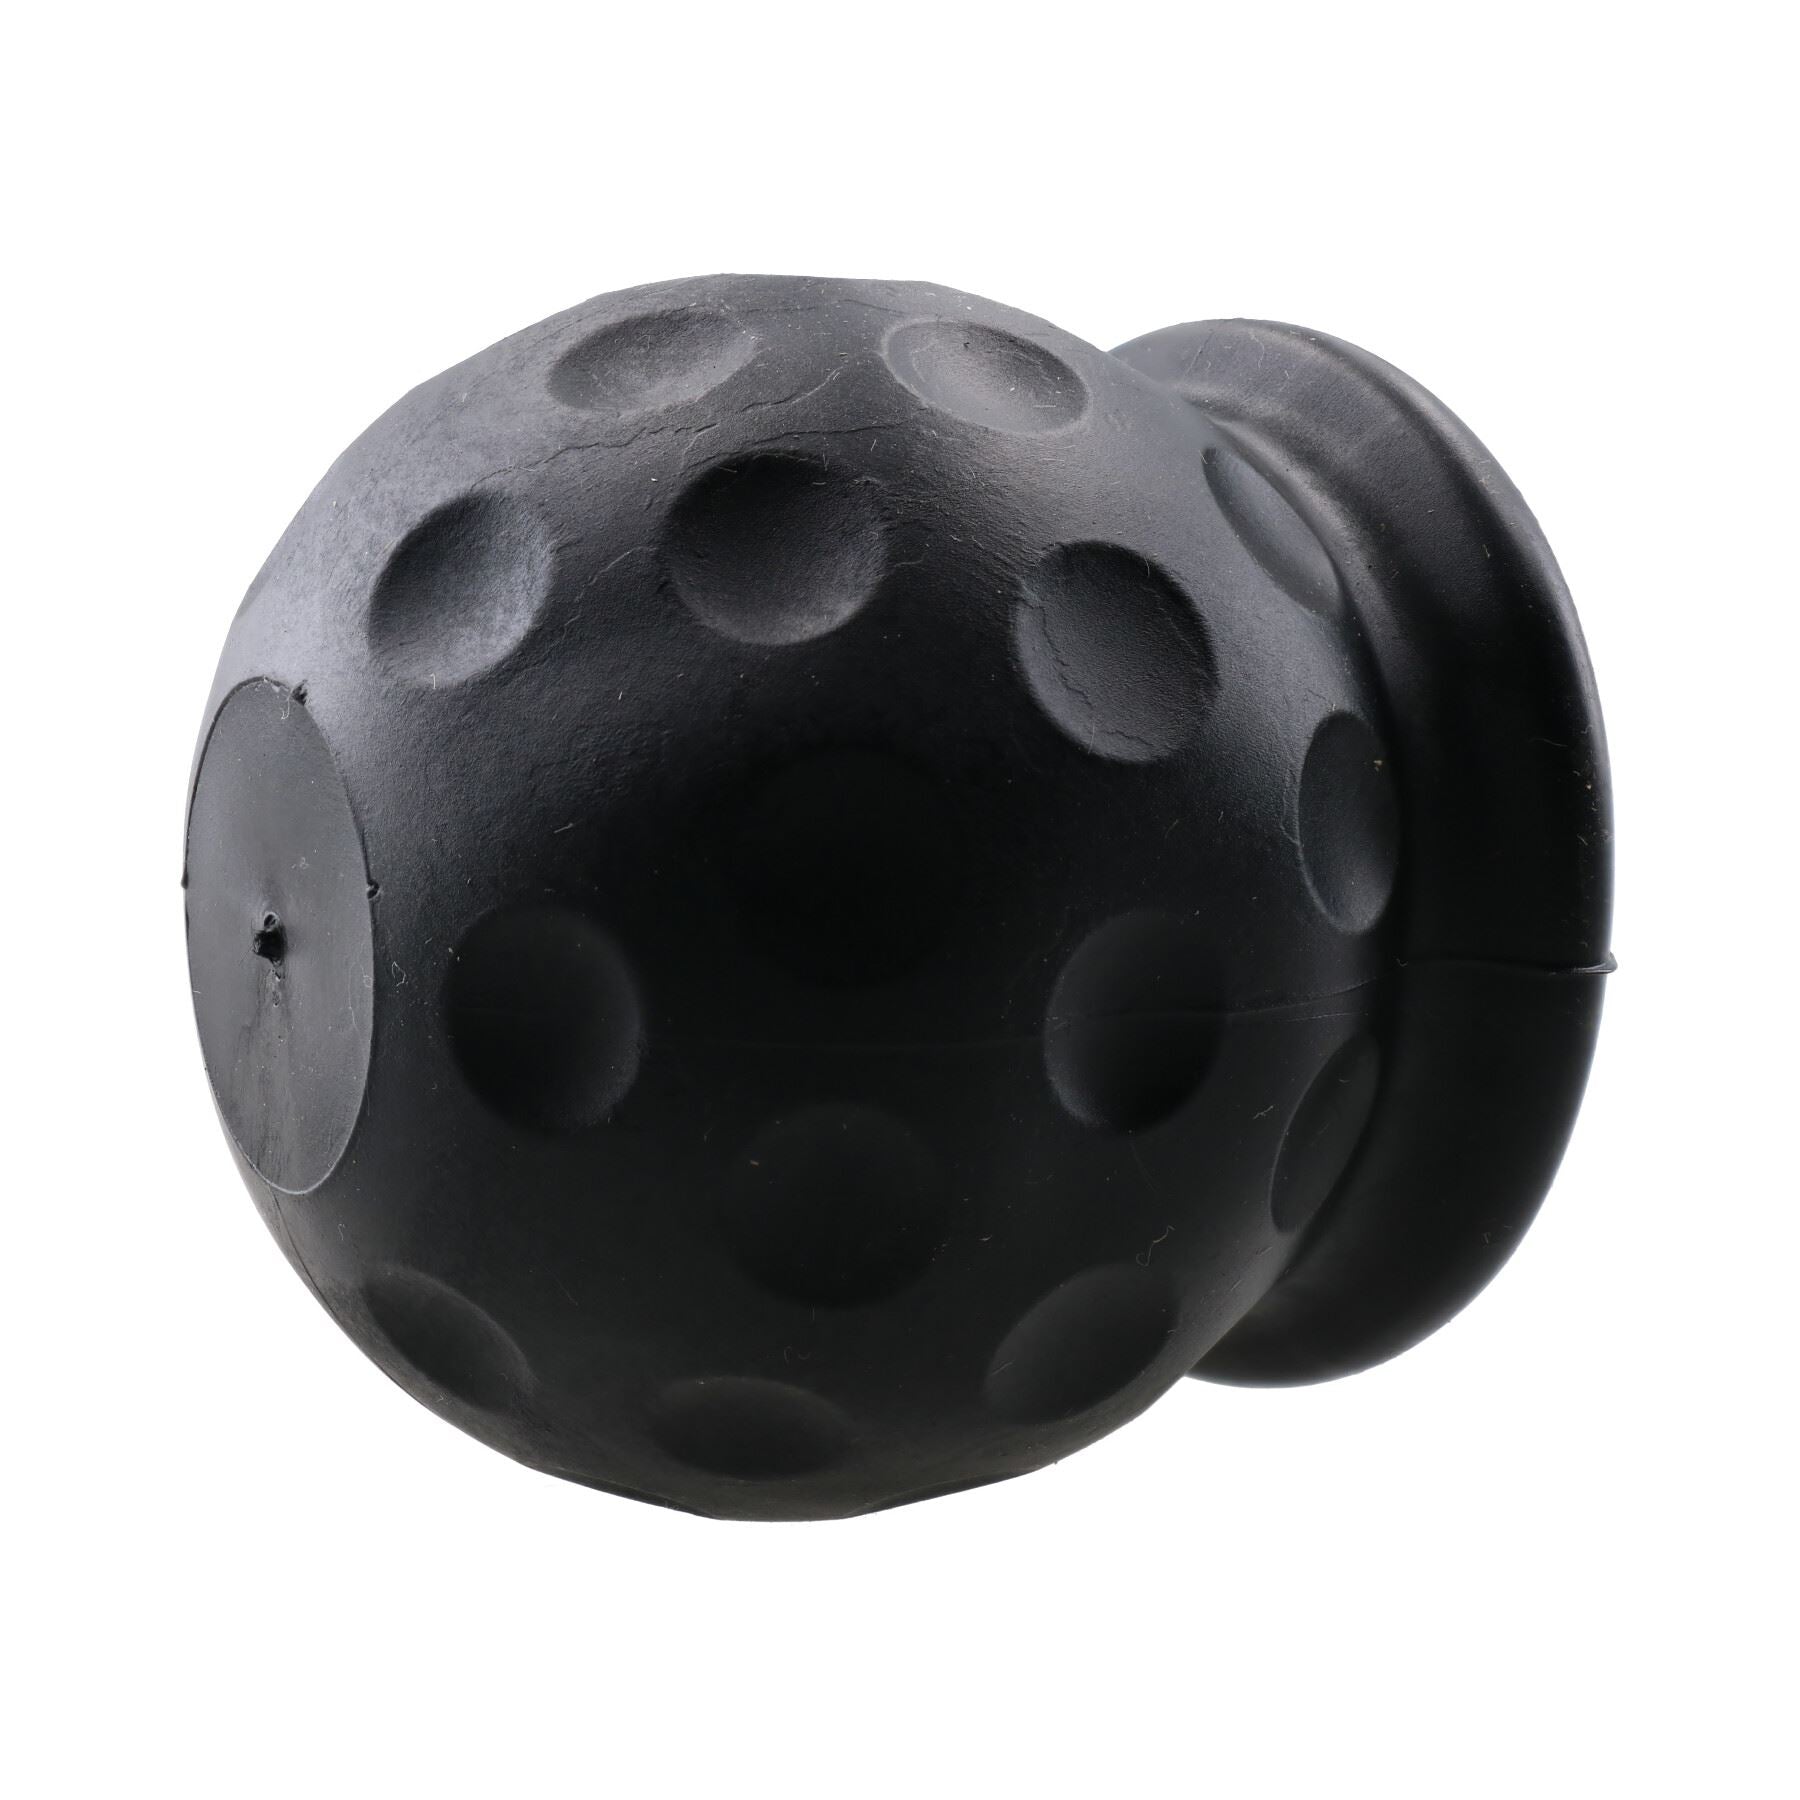 Rubber Golf Ball Style Tow Bar Cover fits all 50mm Tow Balls